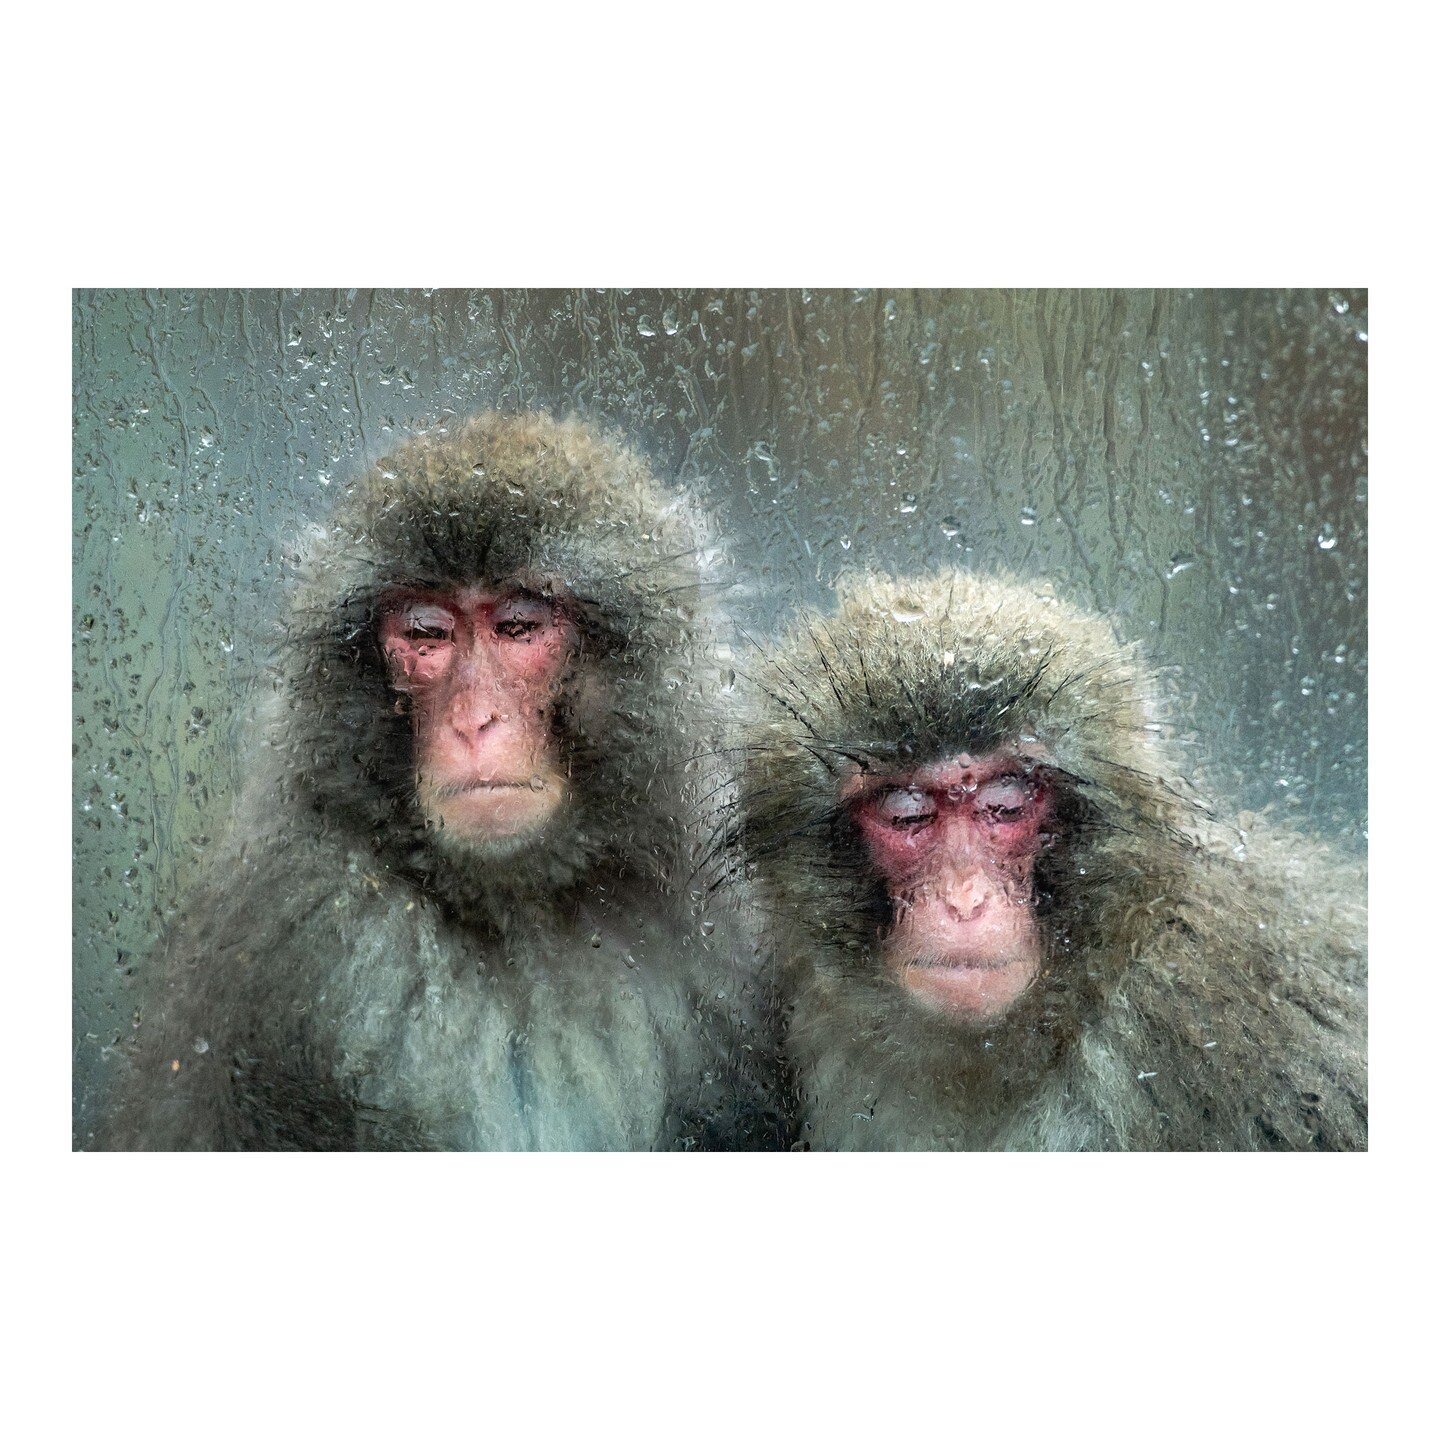 Highland Wildlife Park, Scotland - 31.01.24 - No prizes for guessing the story behind this portrait of Japanese Macaques aka snow monkeys. They are the clan members of this weeks escapee currently roaming the Highlands of Scotland. Well worth a googl